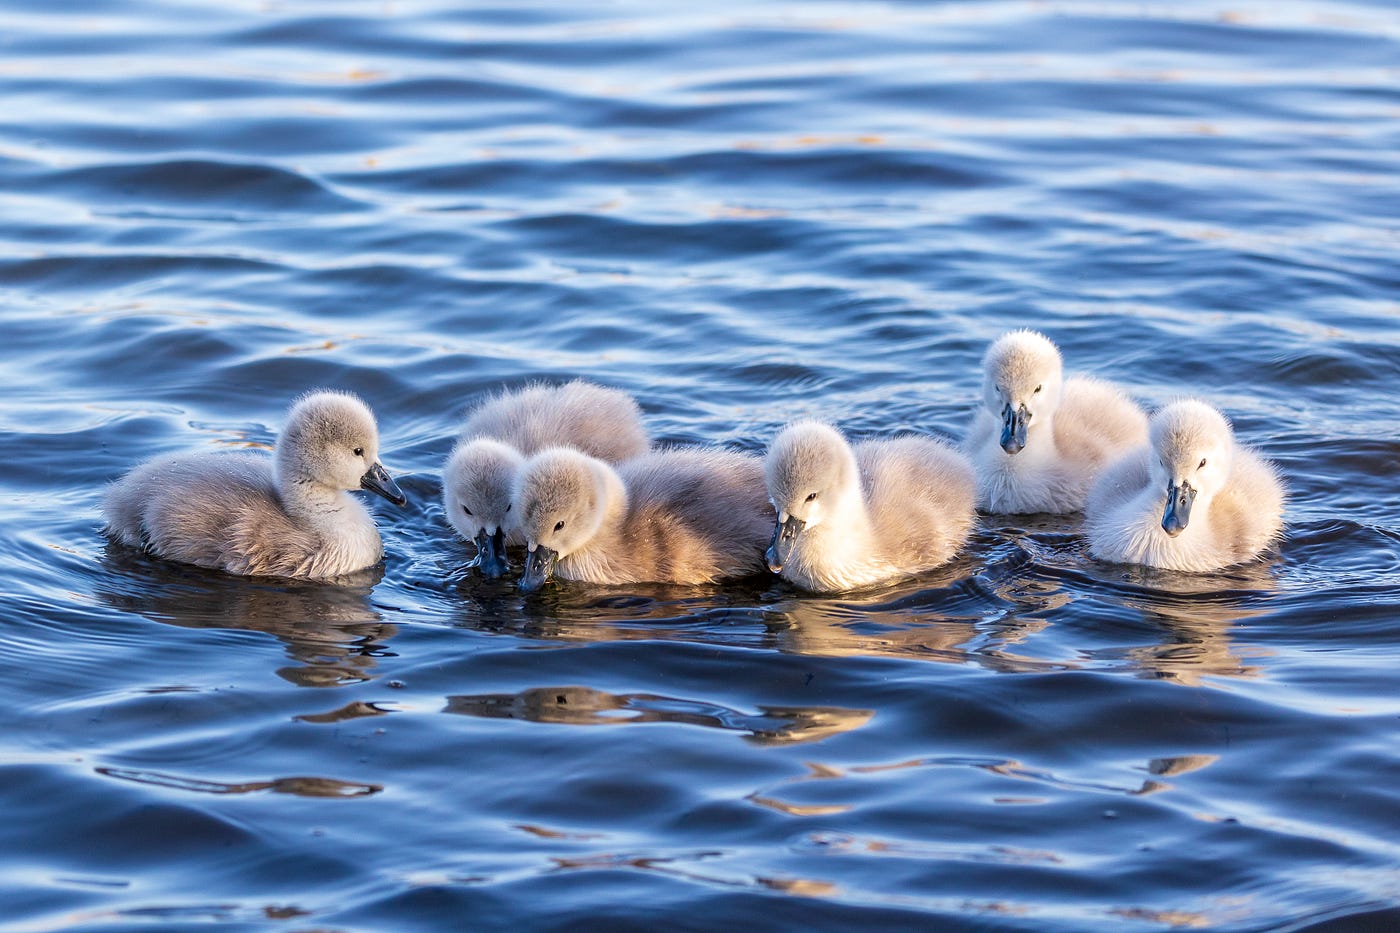 The Ugly Duckling Isn't Ugly. Turns out cygnets are cute as heck